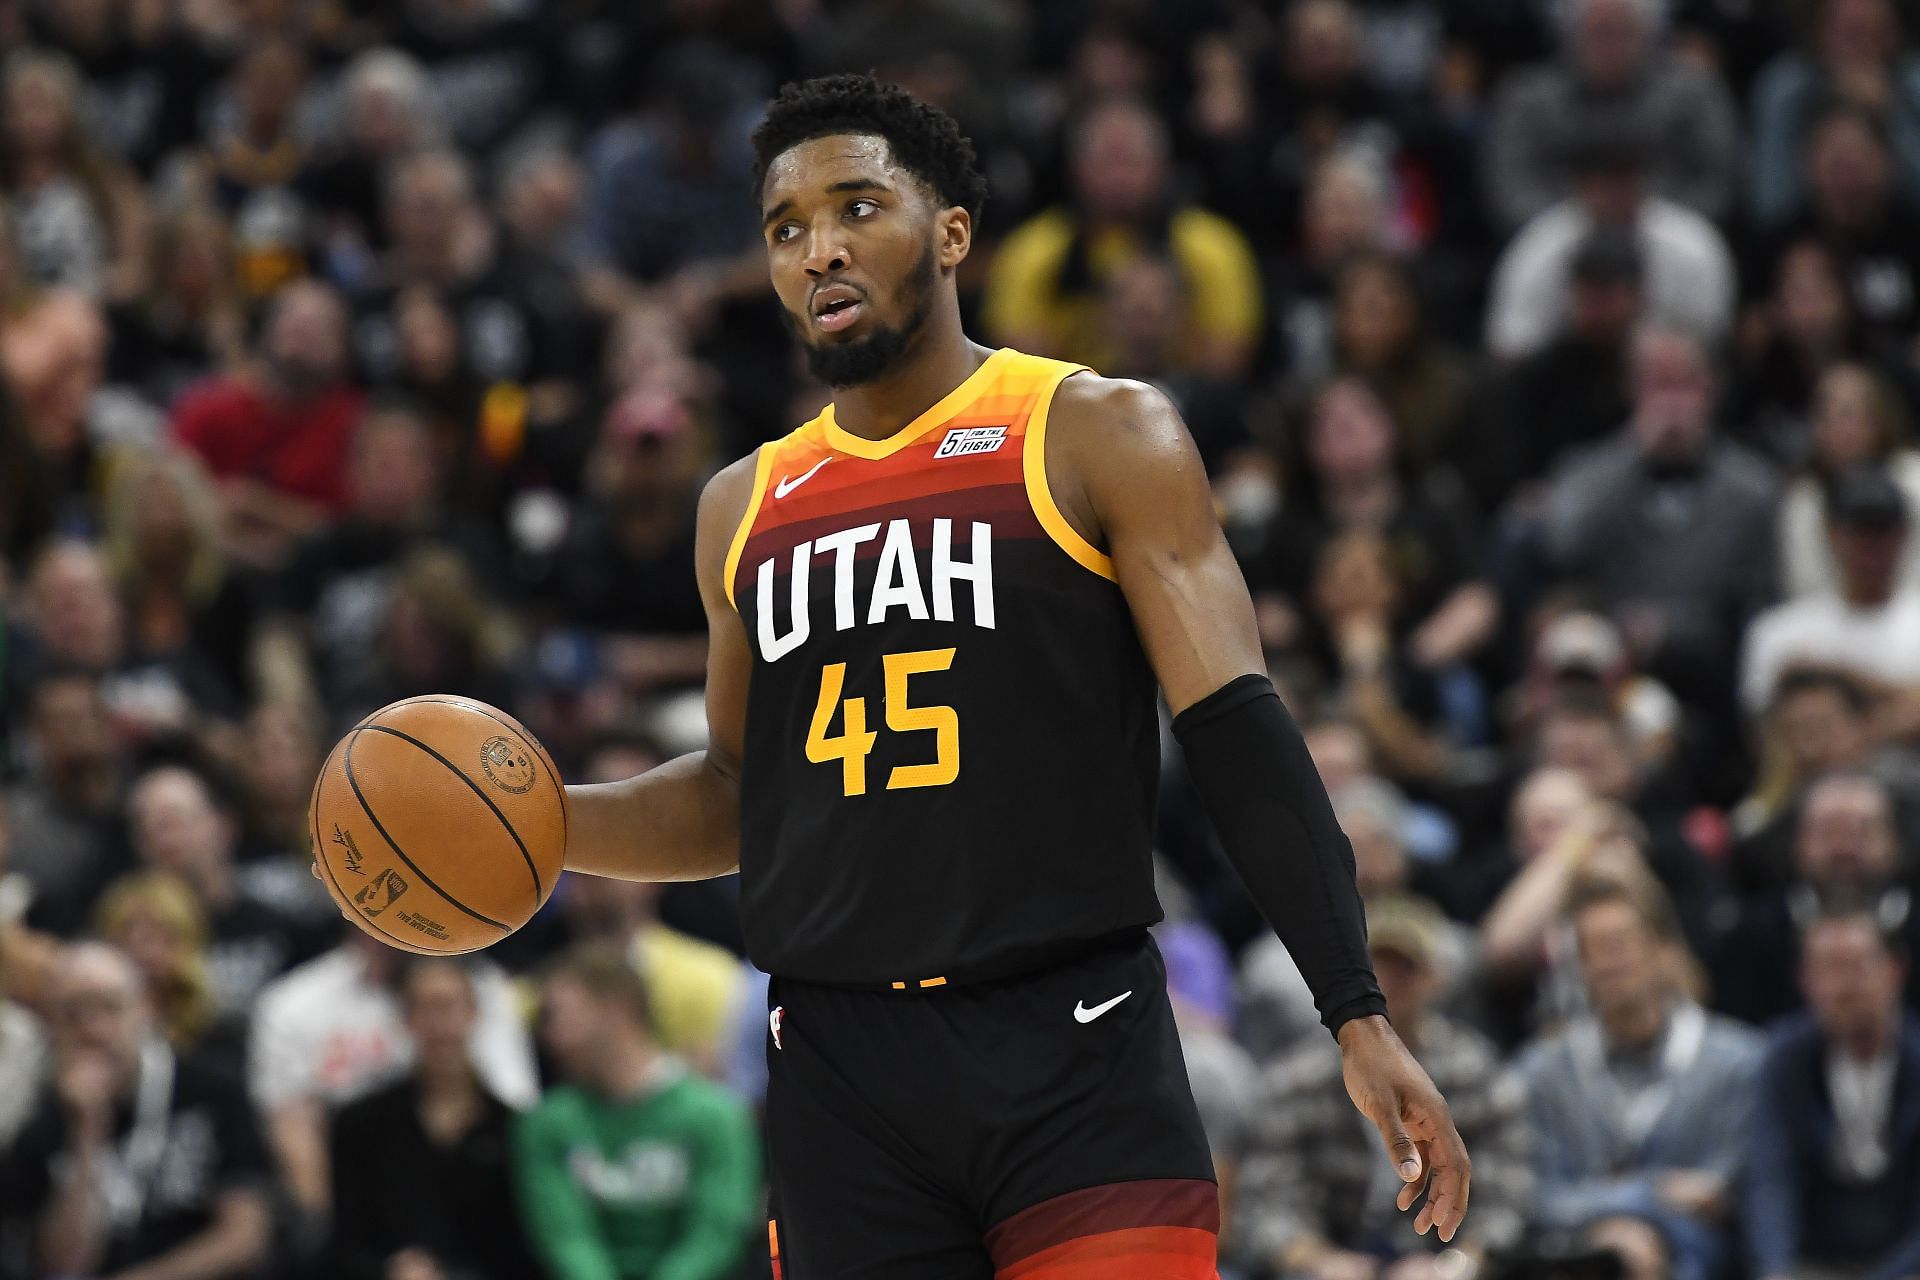 Utah Jazz star Donovan Mitchell continues to be connected to the New York Knicks